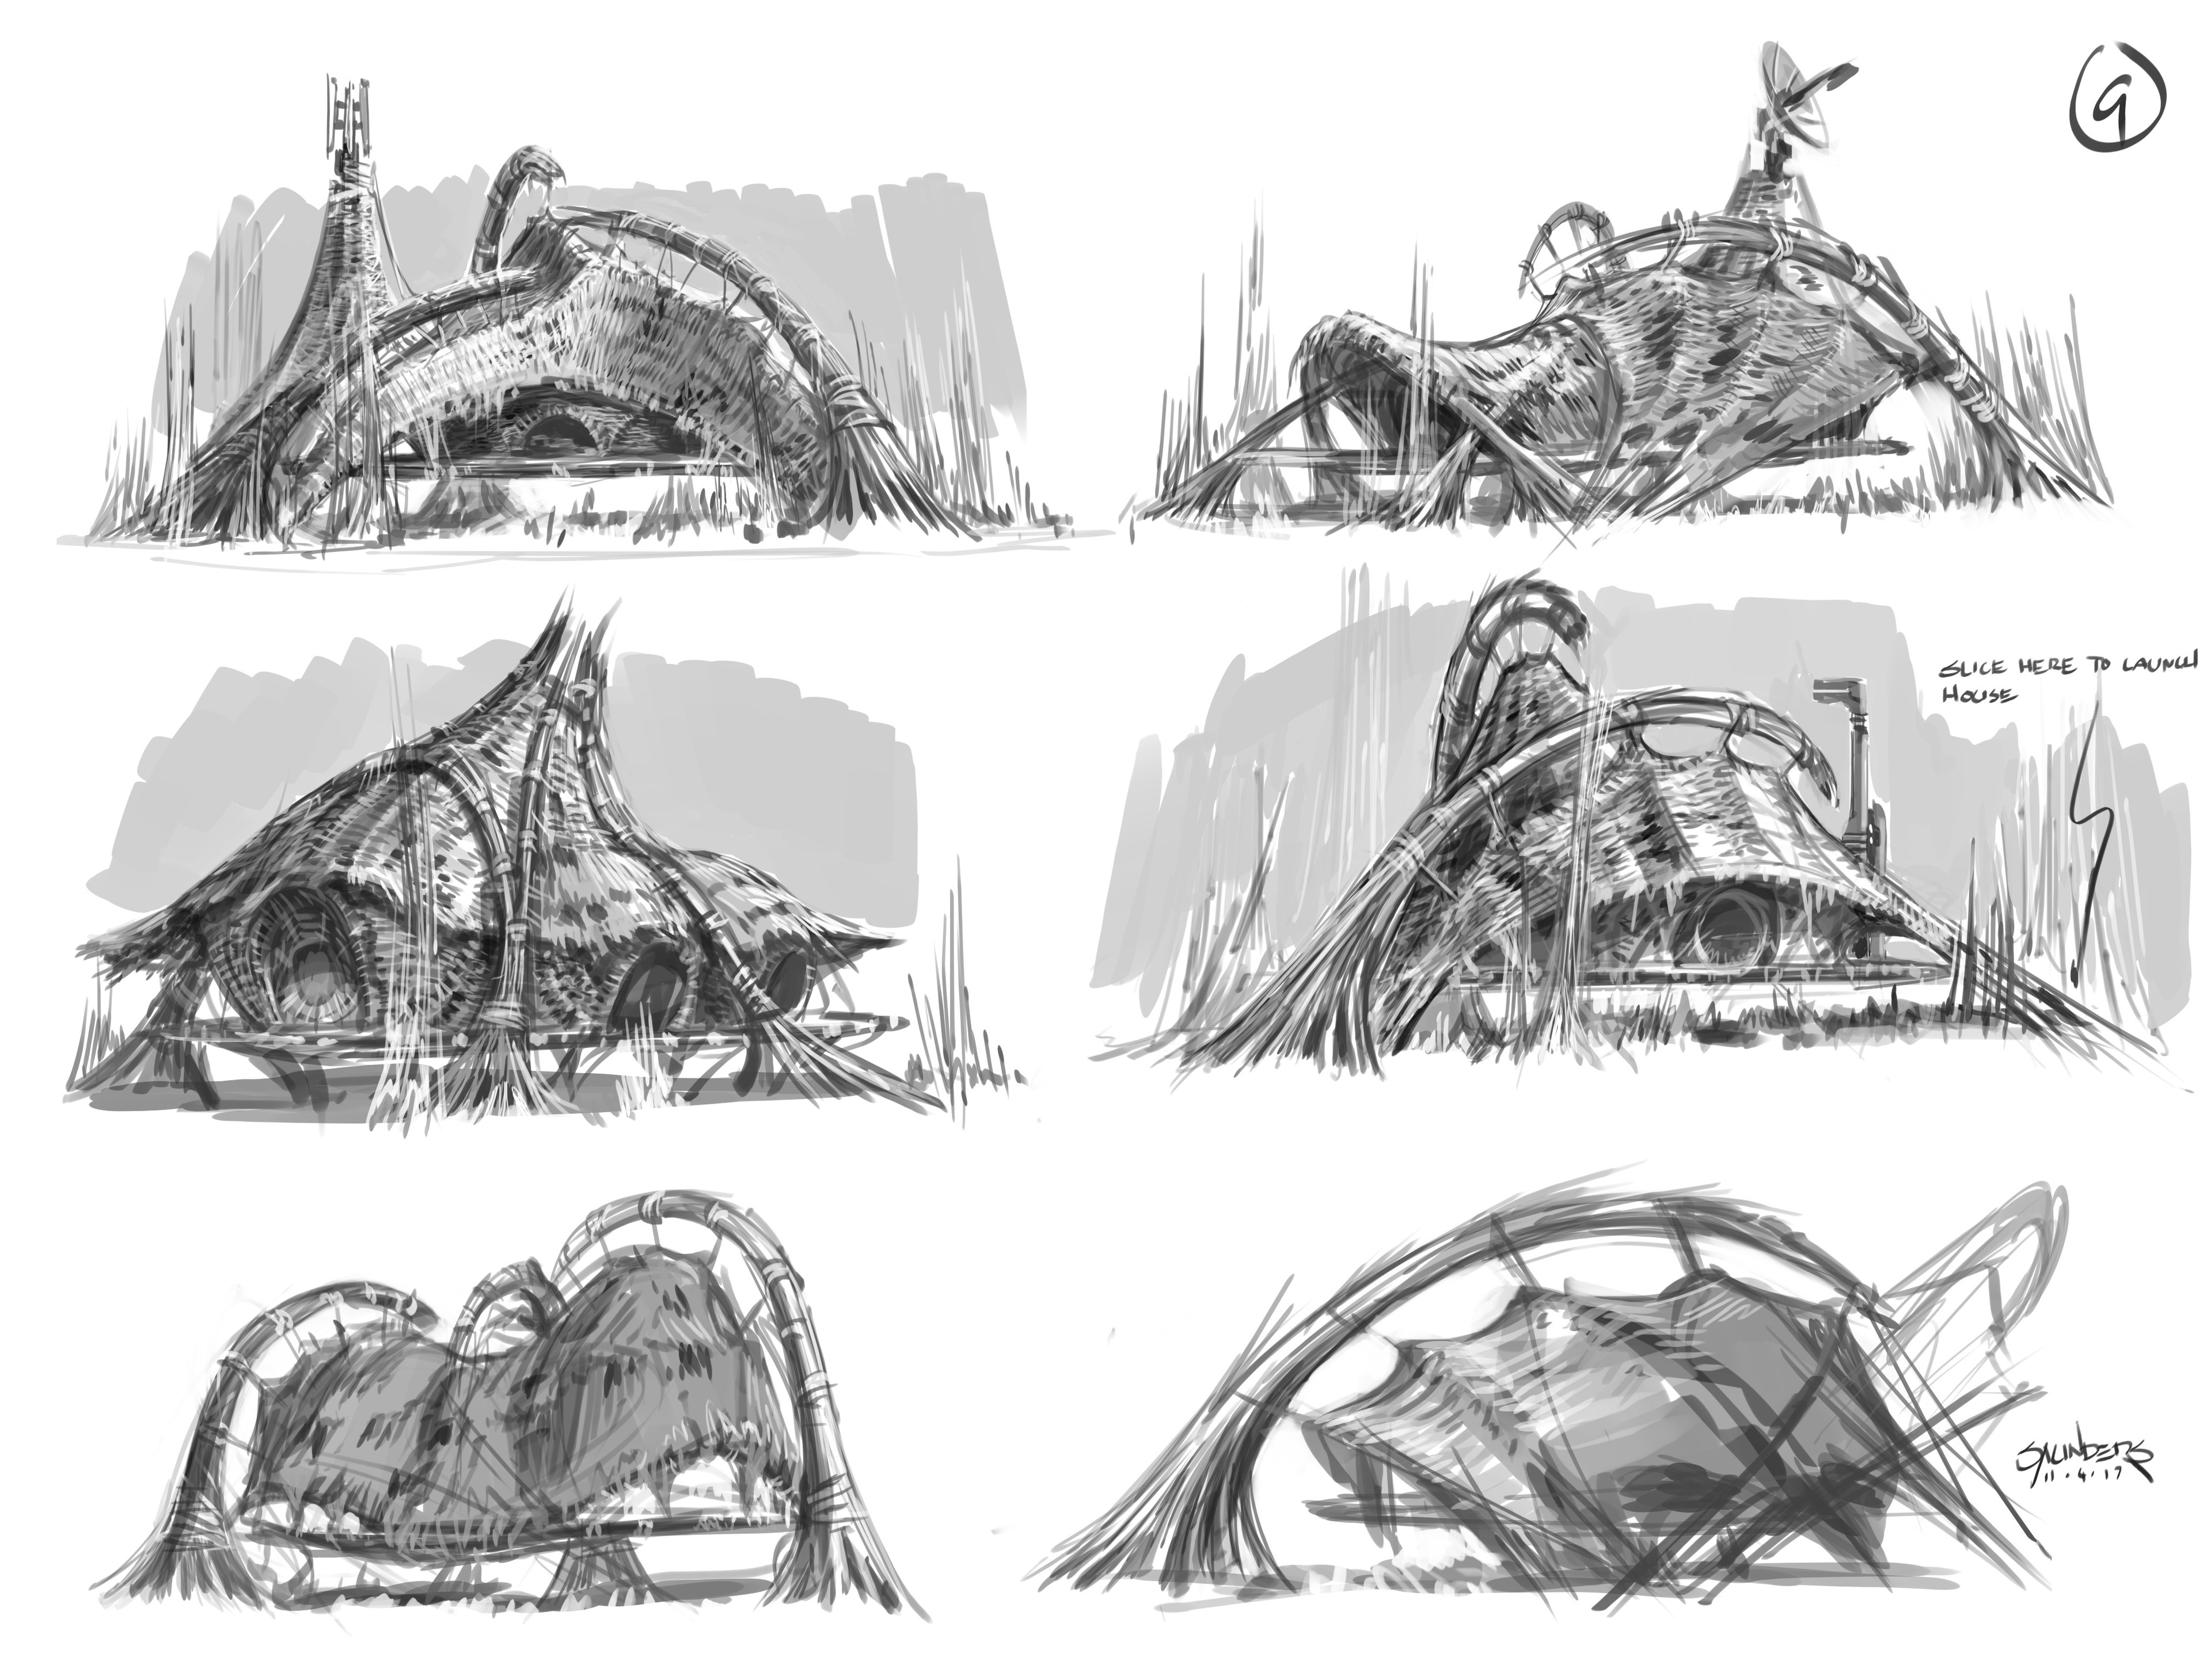 One of many pages of quick sketches for how the reed-based architecture might  work.